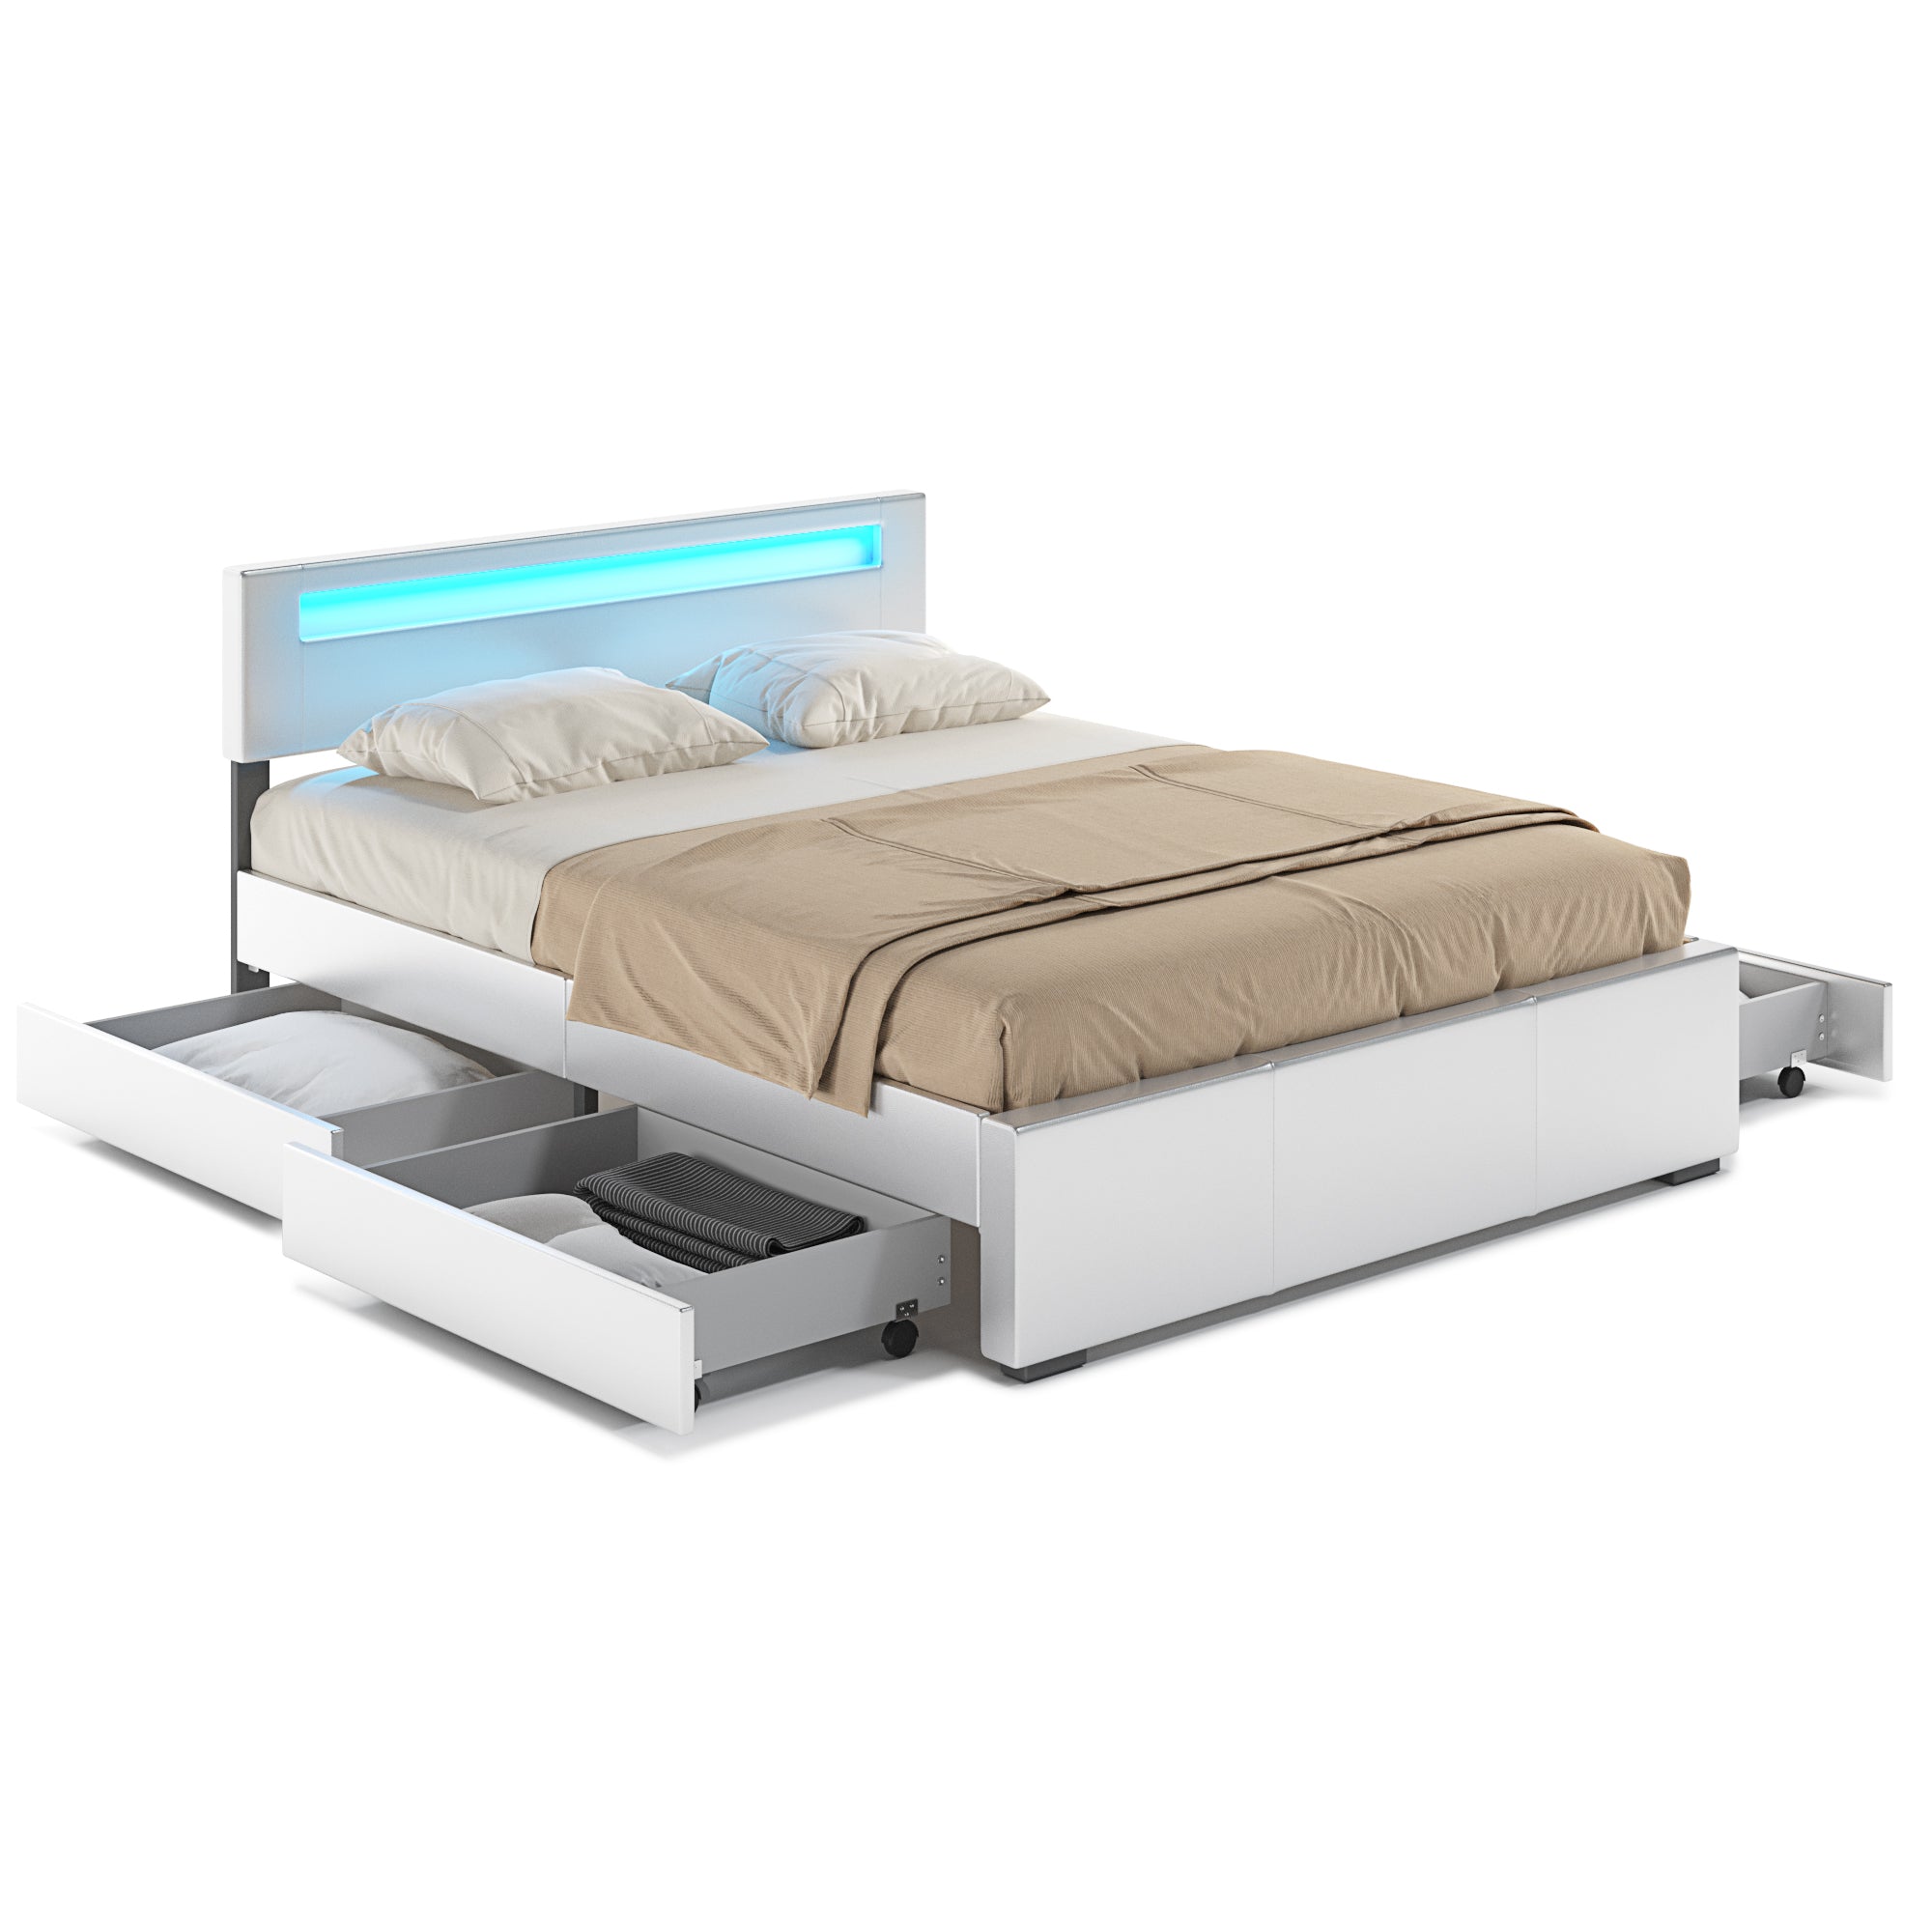 Seven Reasons To Get The Ztozz LED Bed